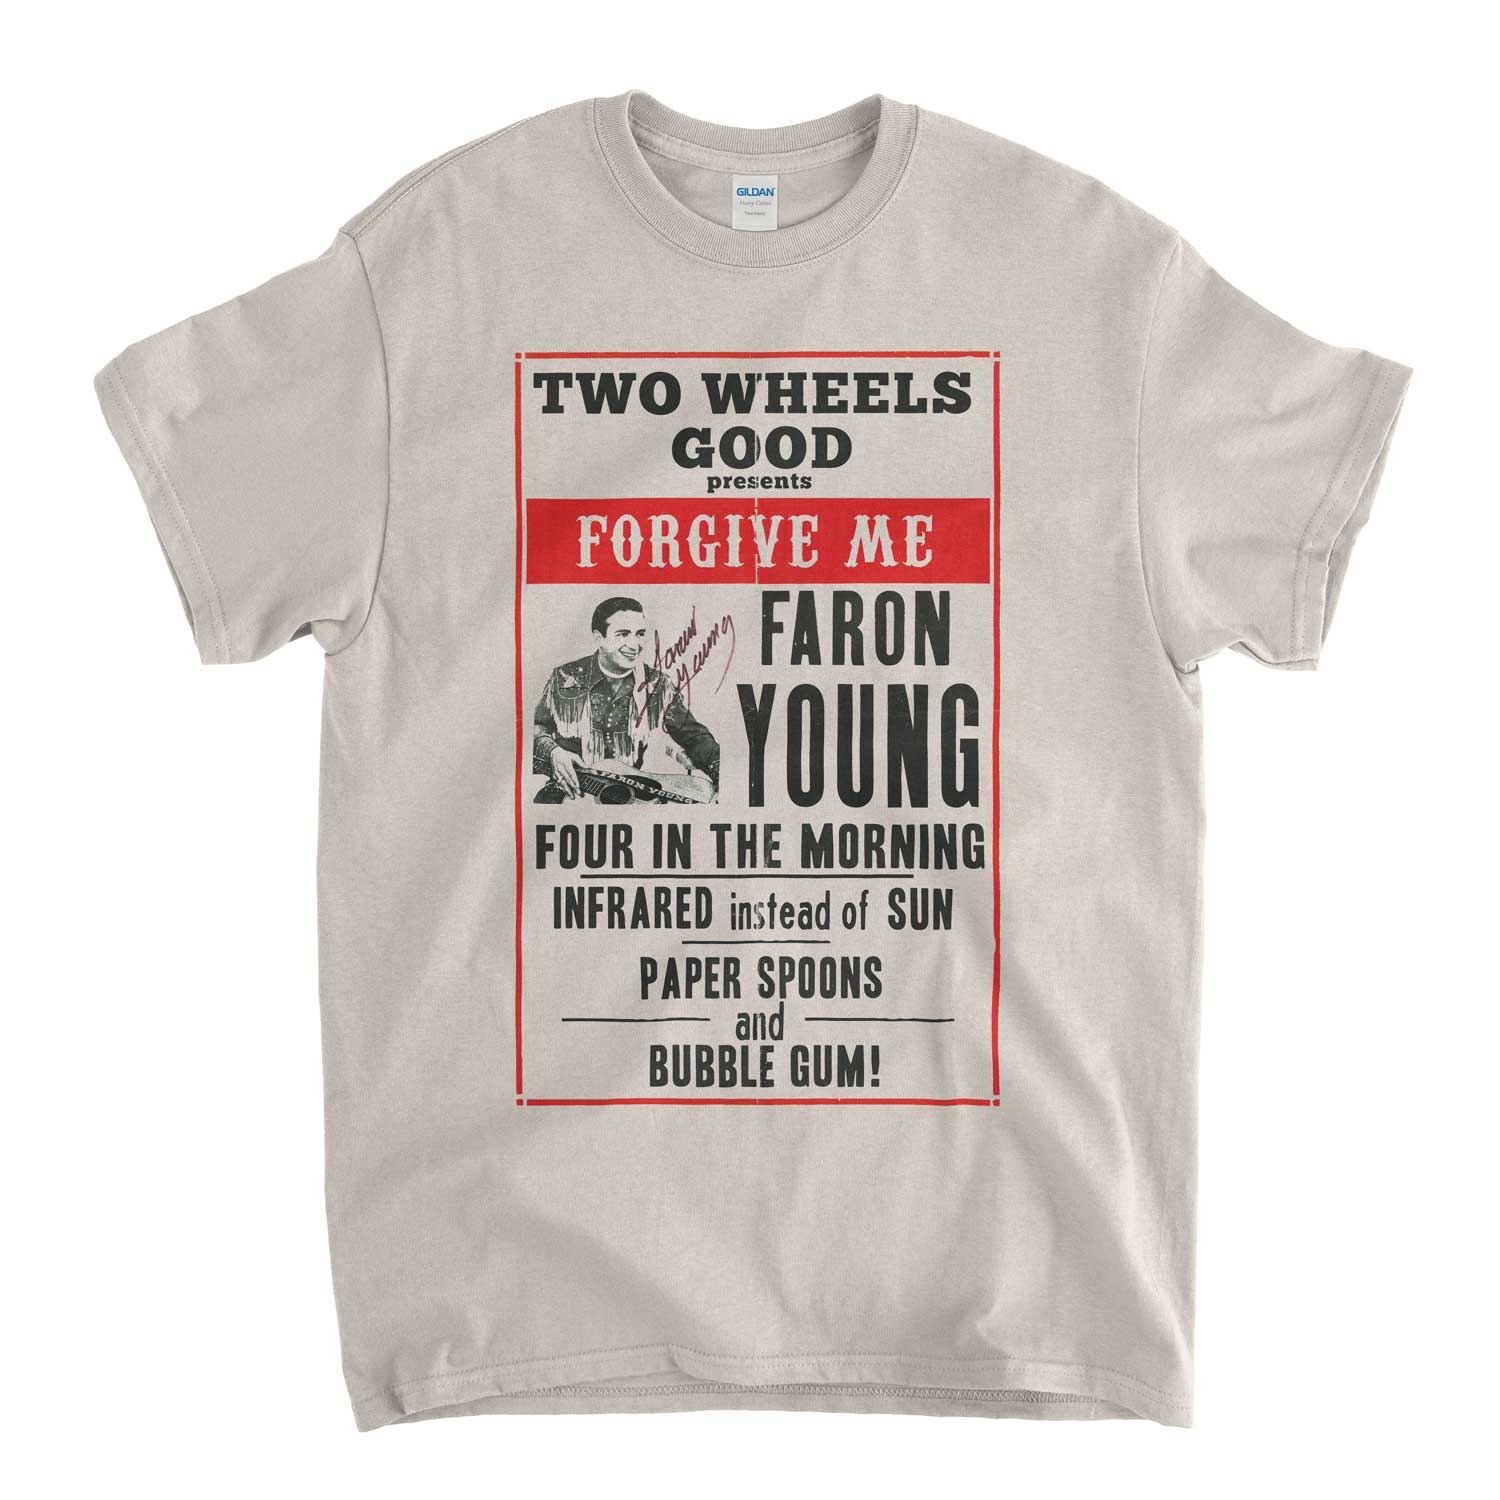 Inspired by Prefab Sprout T Shirt - Faron Young Poster Old Skool Hooligans